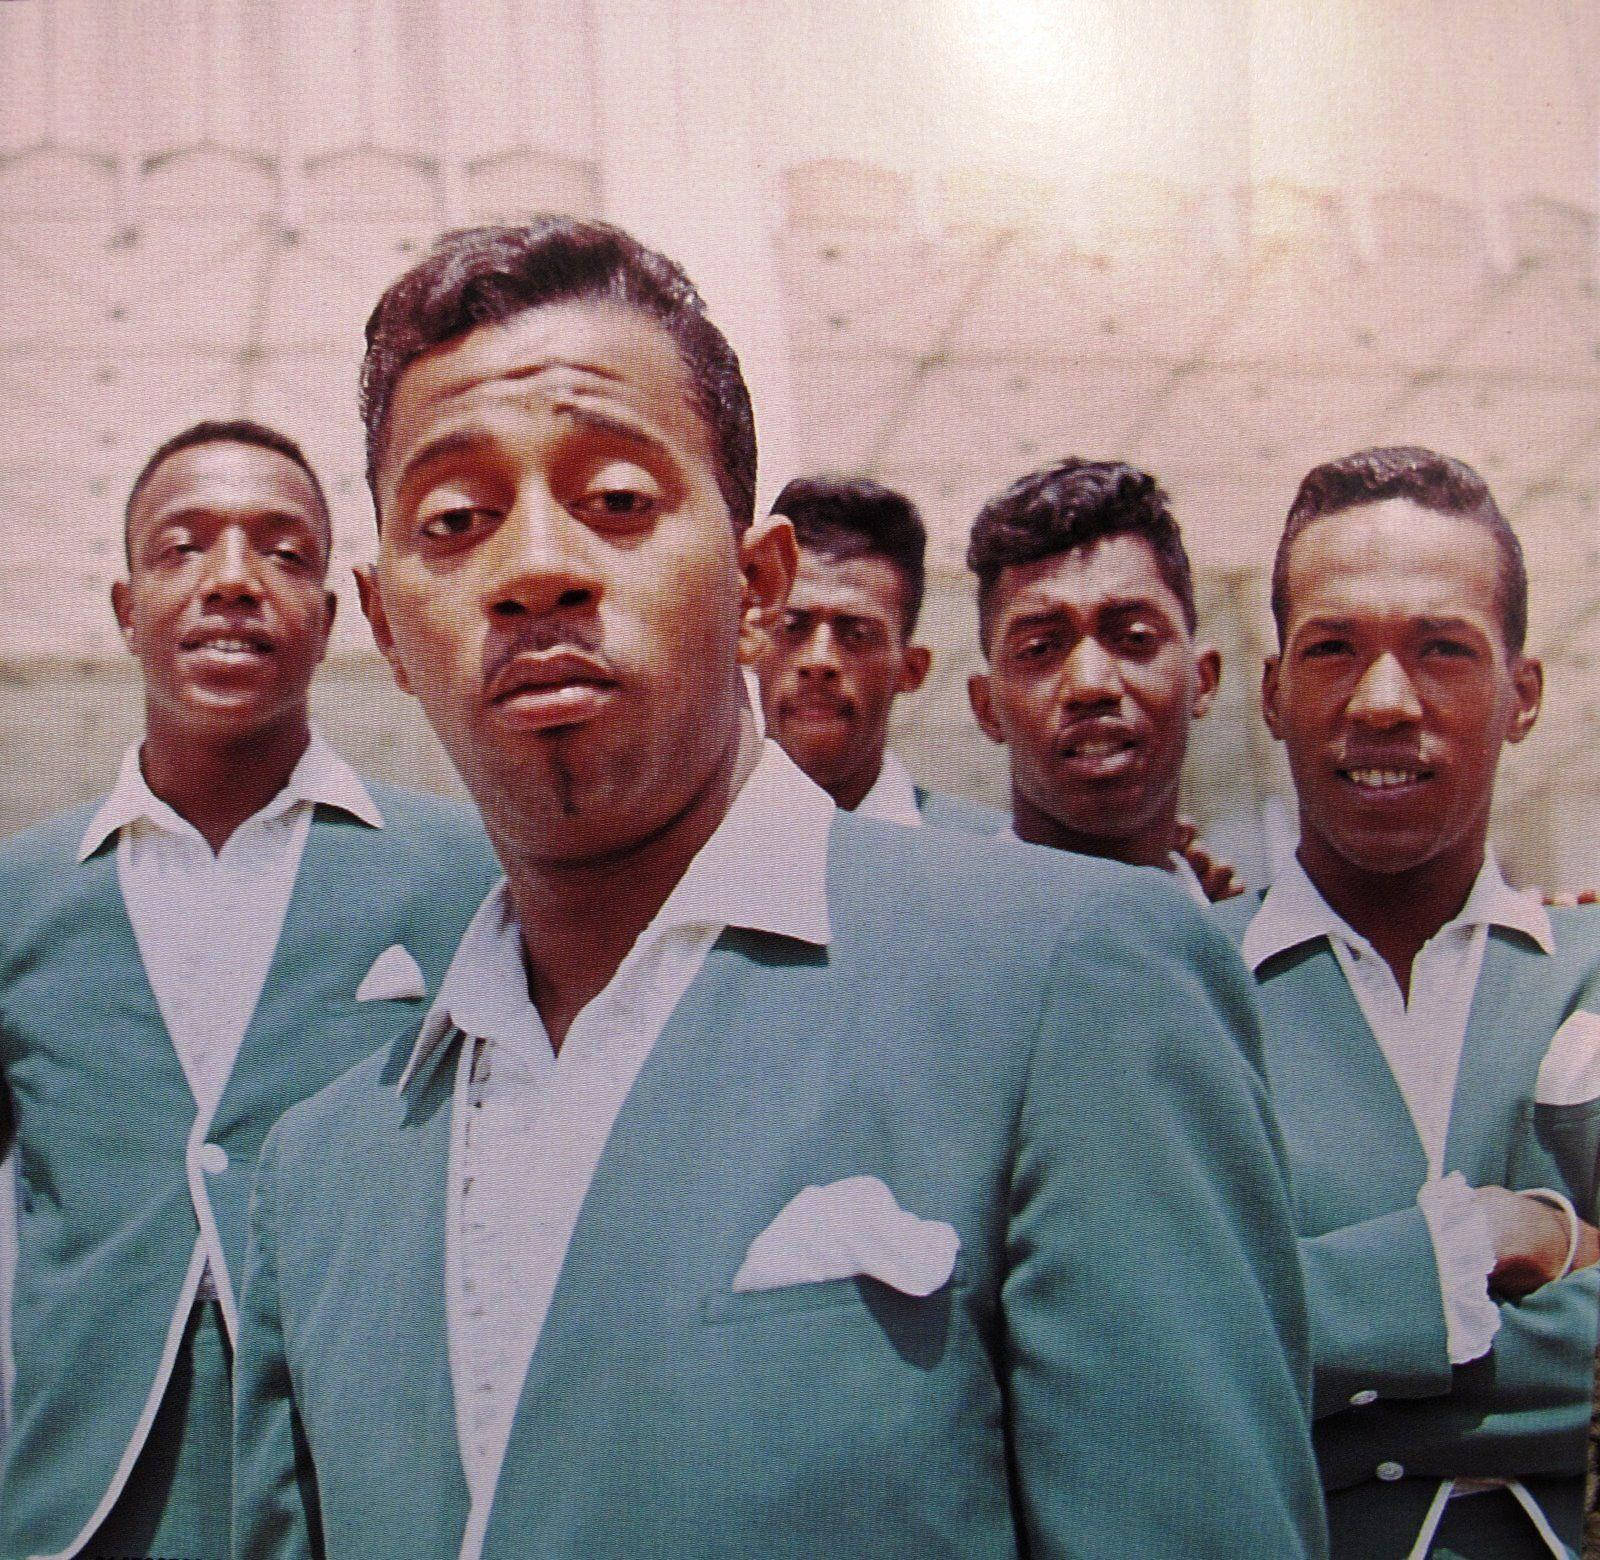 American Vocal Group The Temptations Vintage Close Up Shot Wallpaper